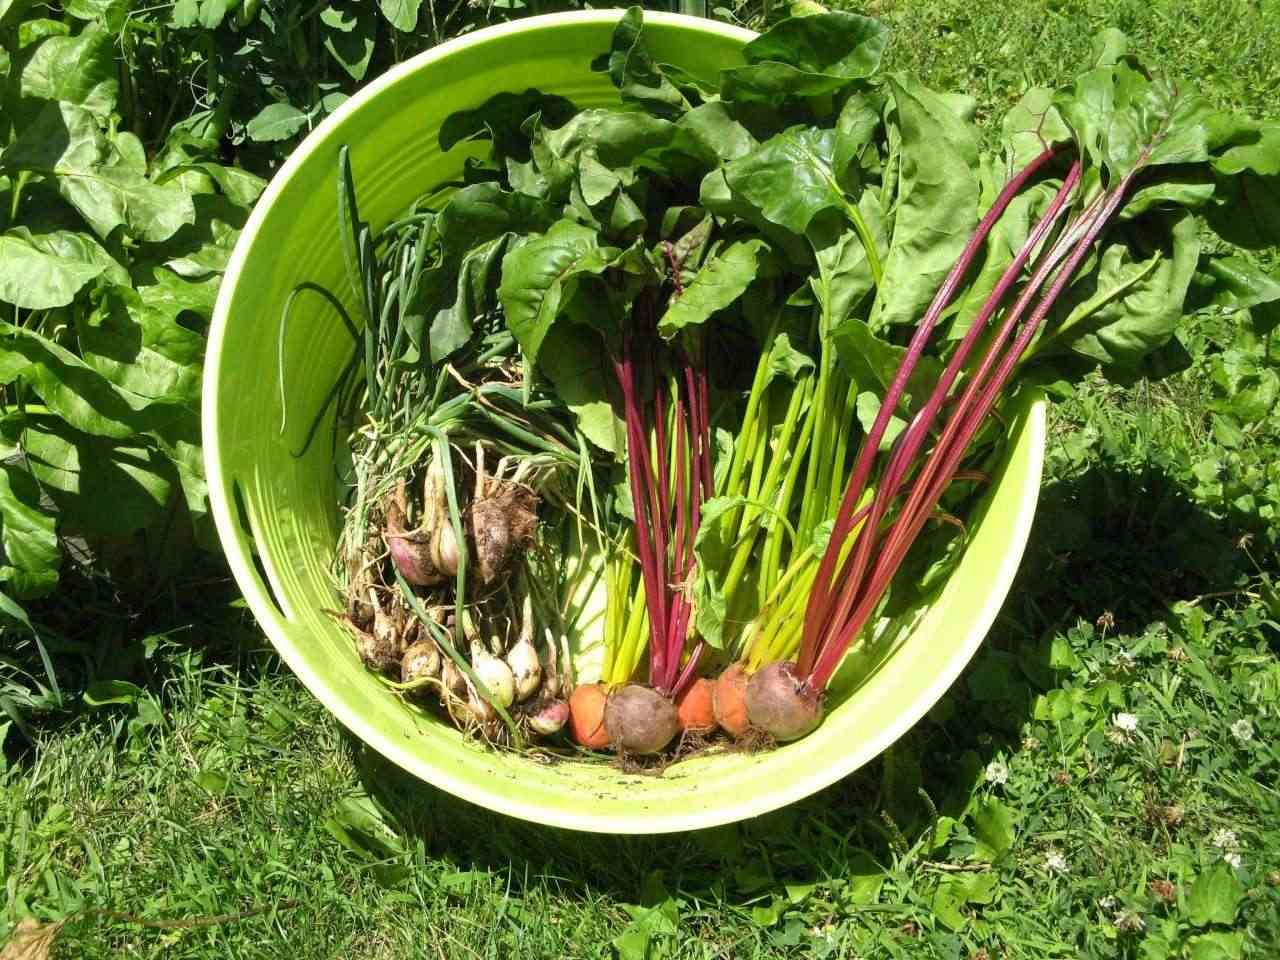 Turnips, Beets, Kohlrabi, and other roots Jun_2910